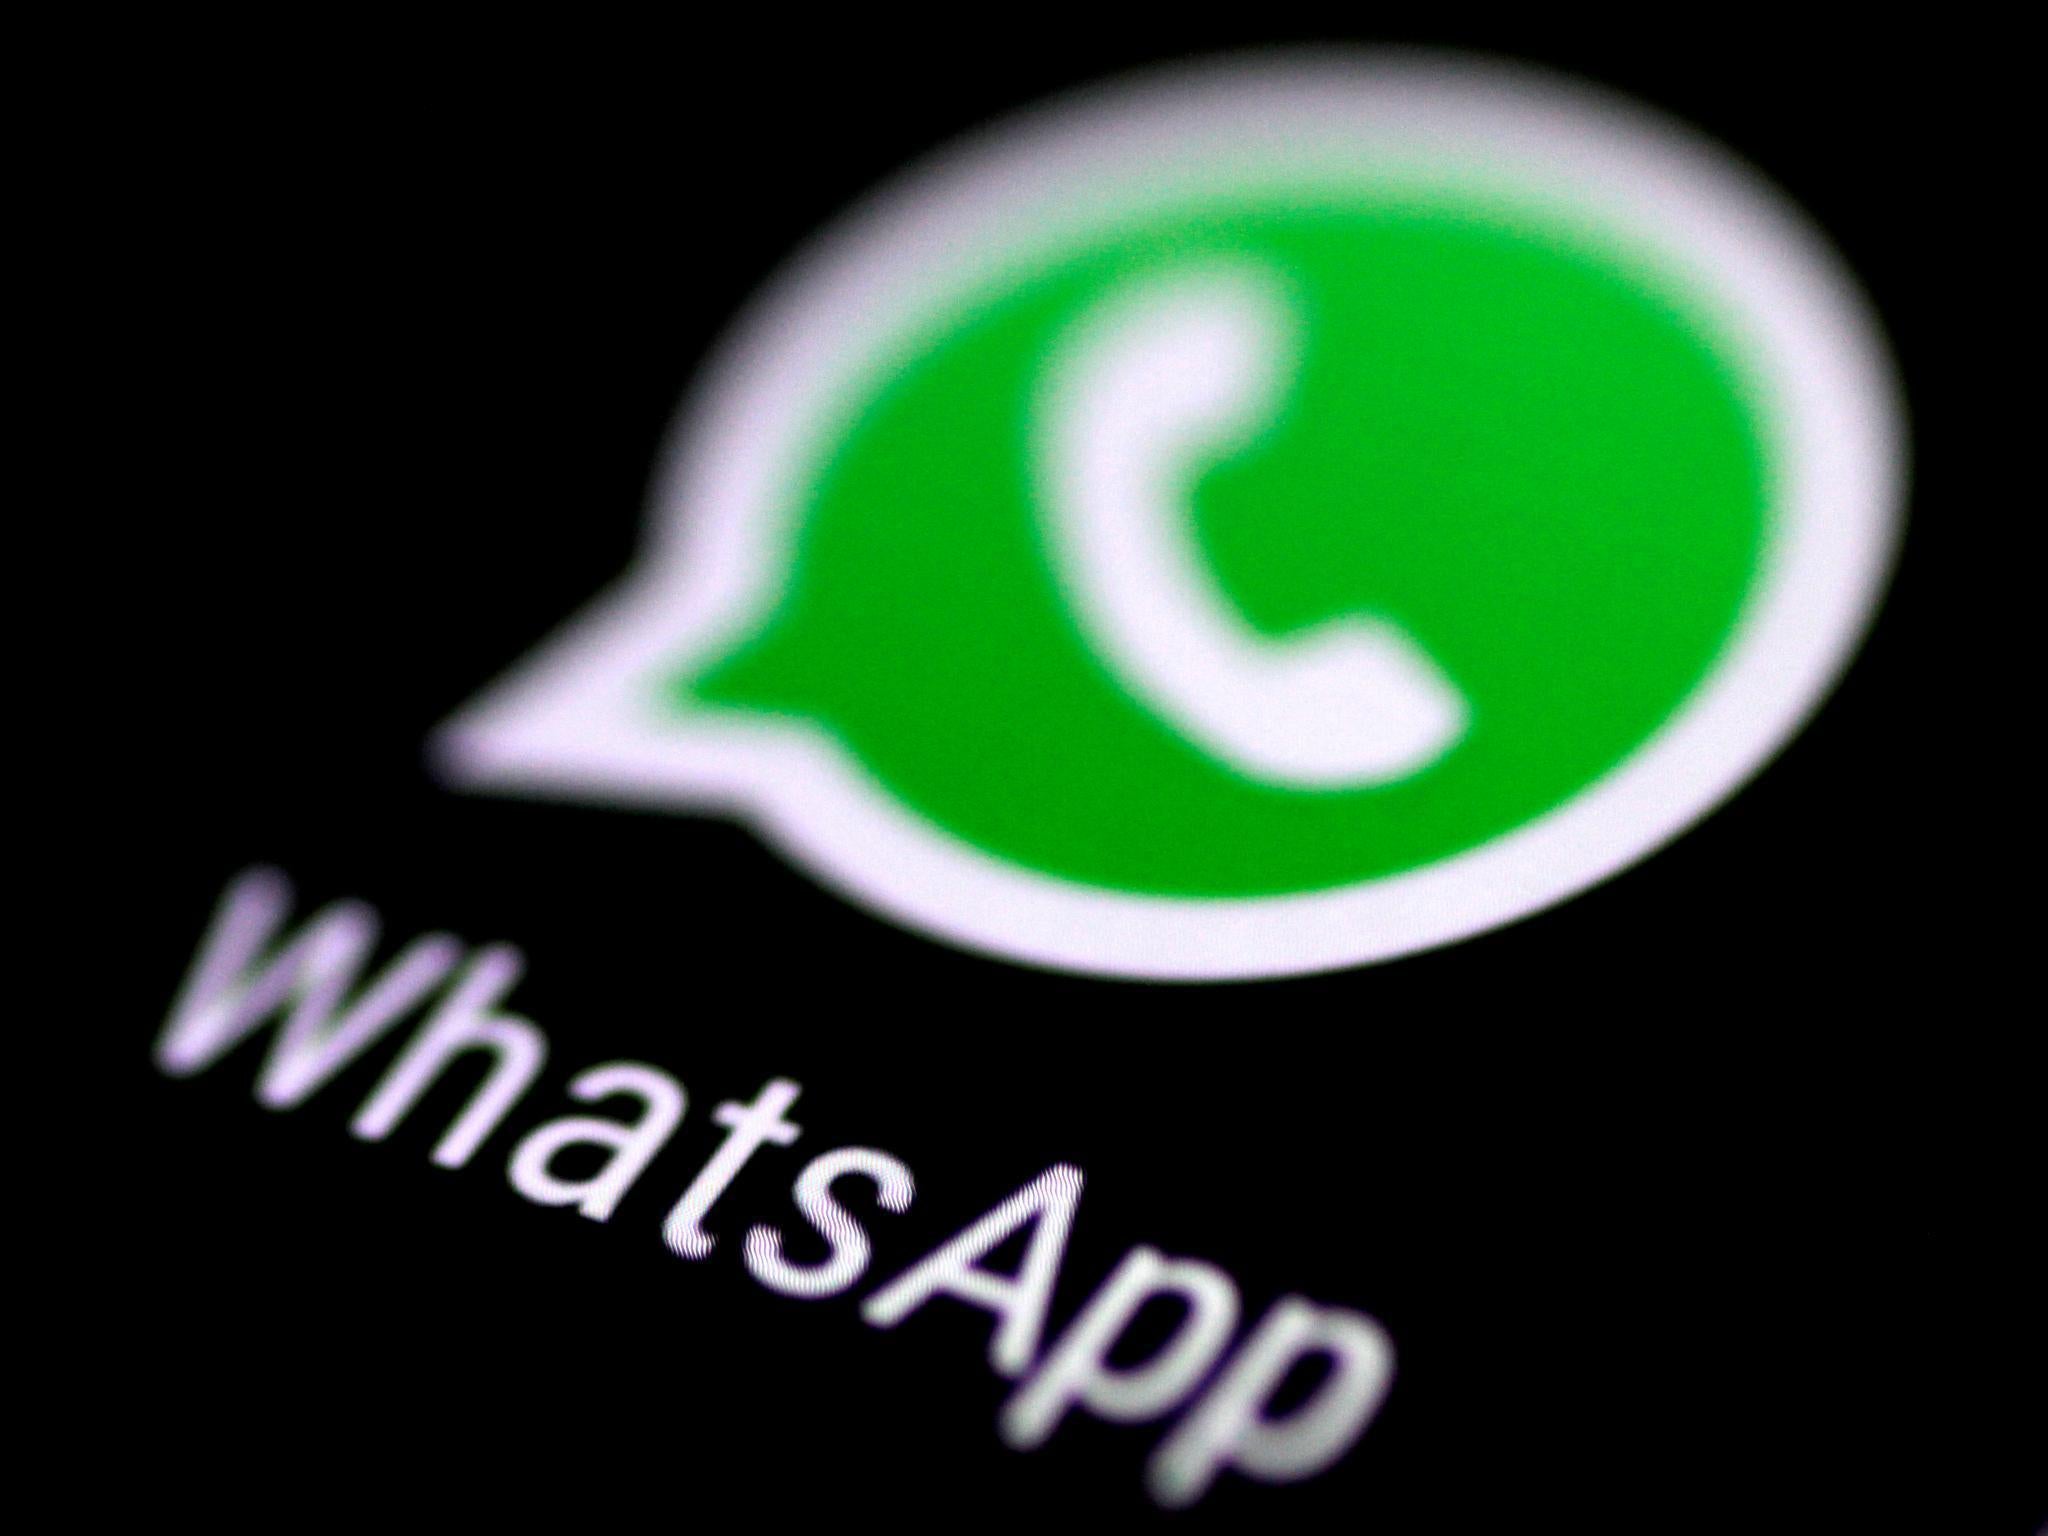 WhatsApp to stop working on phones running Windows Phone 8 and BlackBerry 10 on New Year's Day